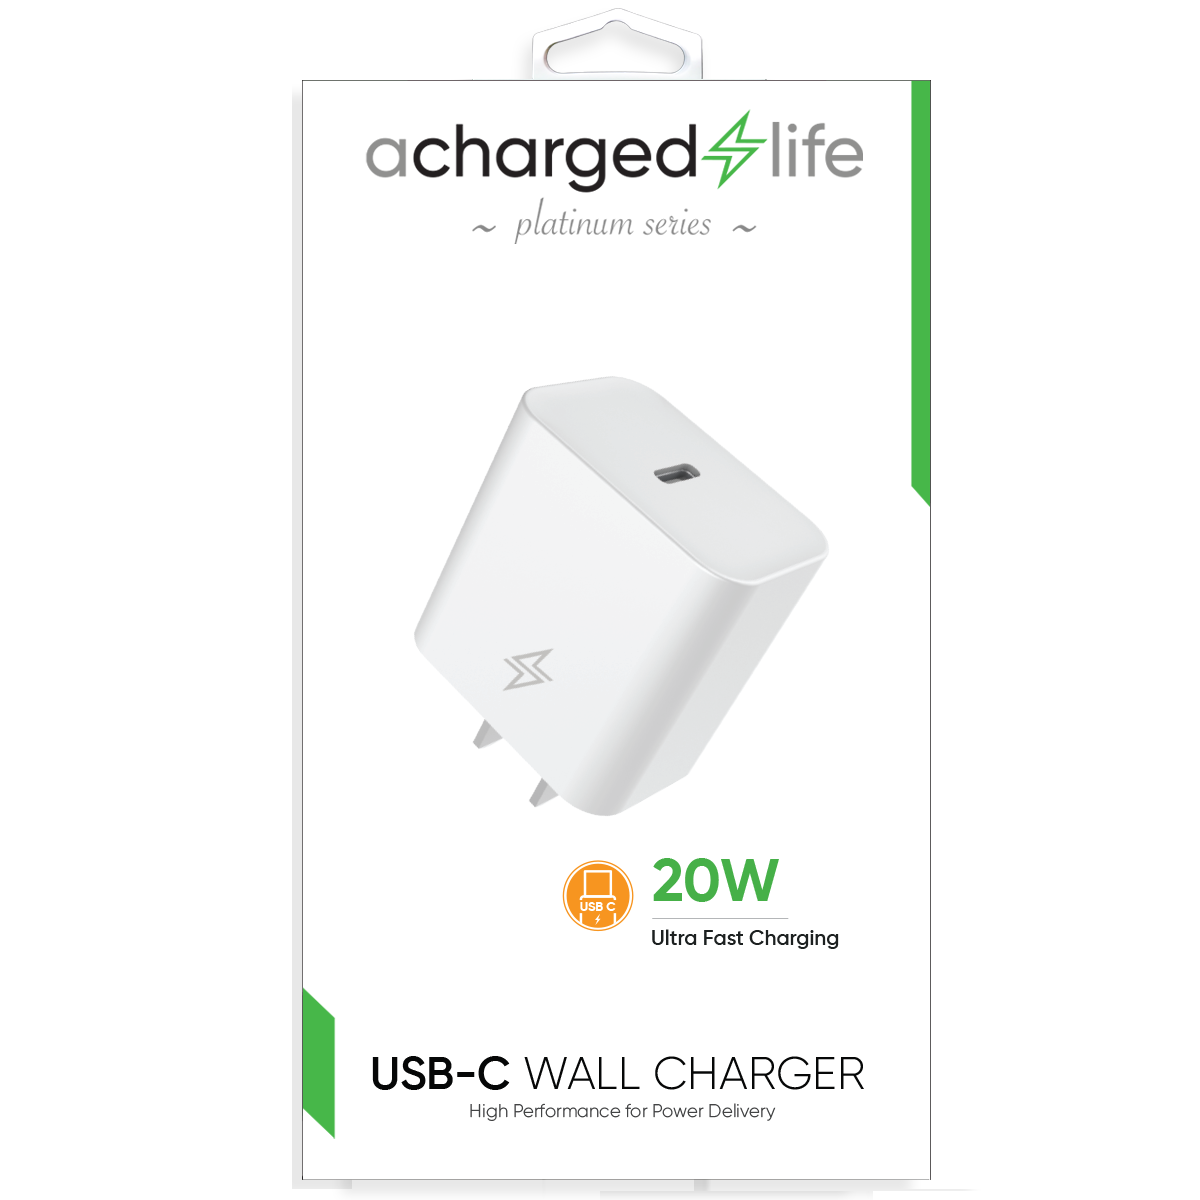 CL202 - Wall Charger 20W Single USB-C Port White